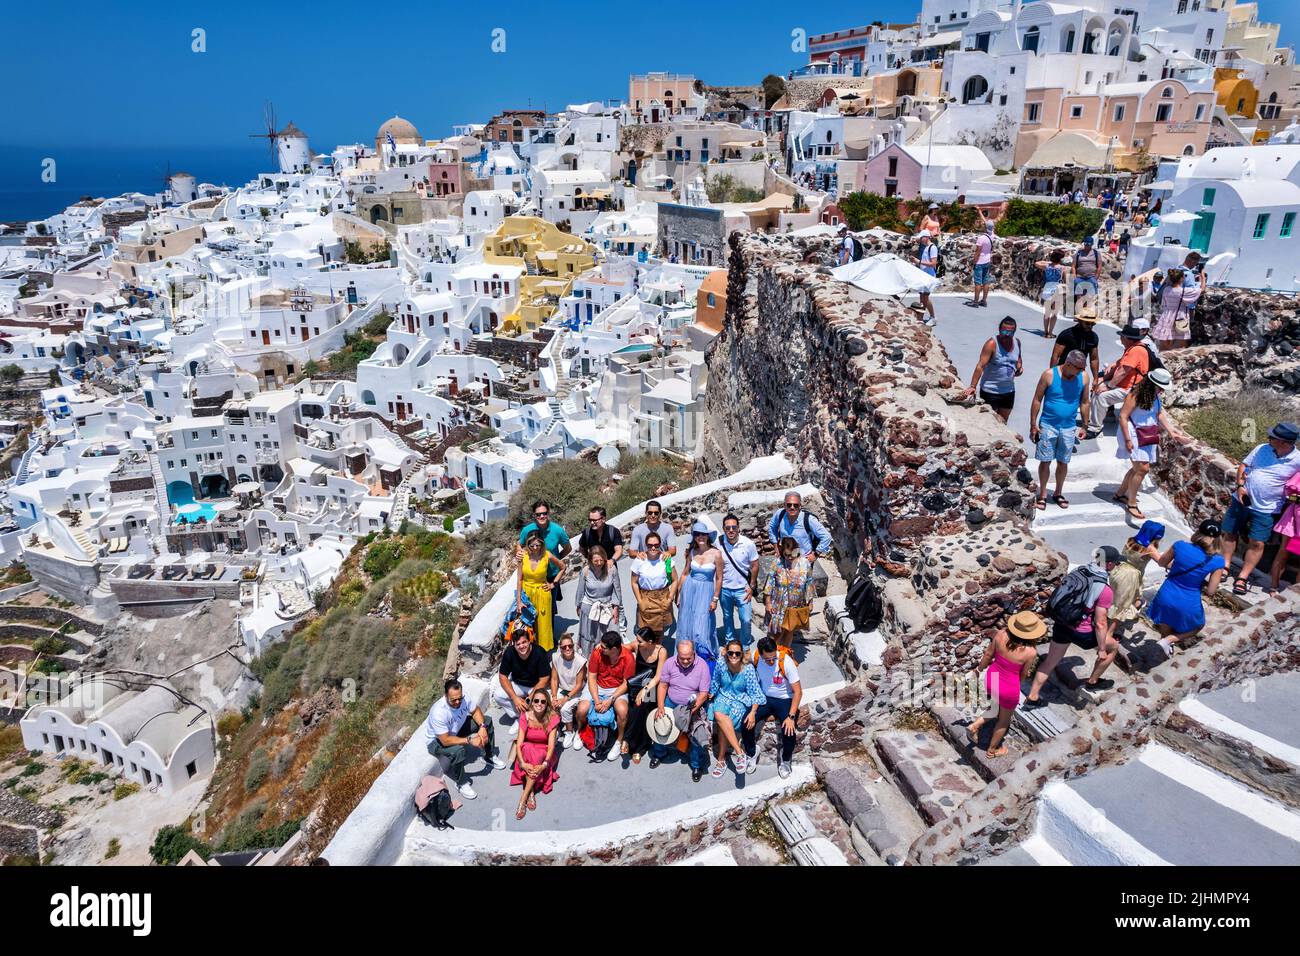 Group of tourists resting with part of Oia village in the background. Santorini island, Cyclades, Aegean sea, Greece. Stock Photo